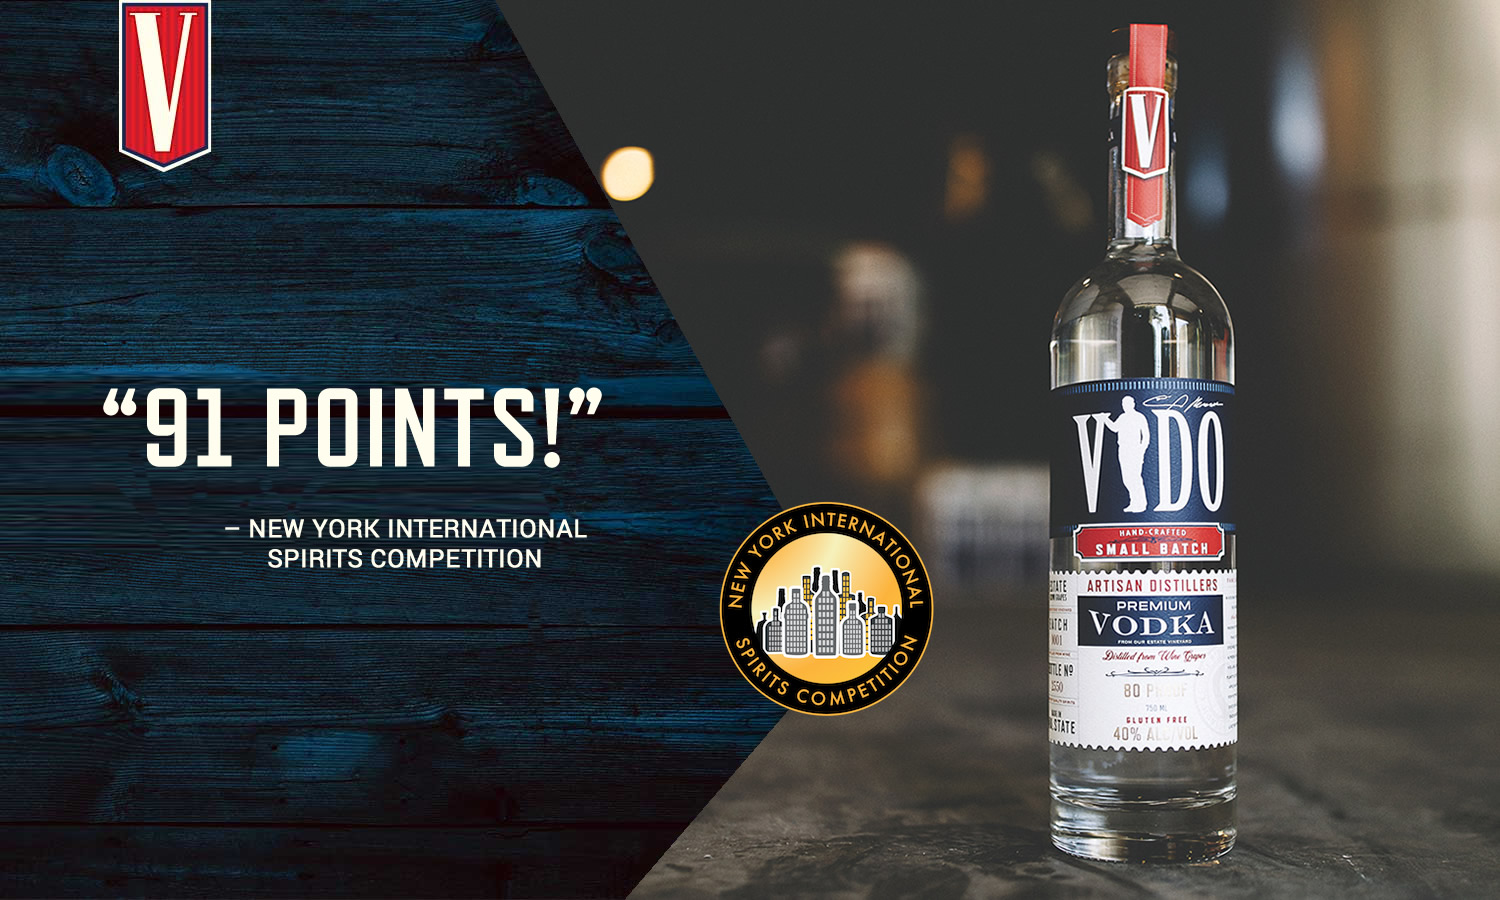 news article 5 - 91 Points! - New York International Spirits Competition 